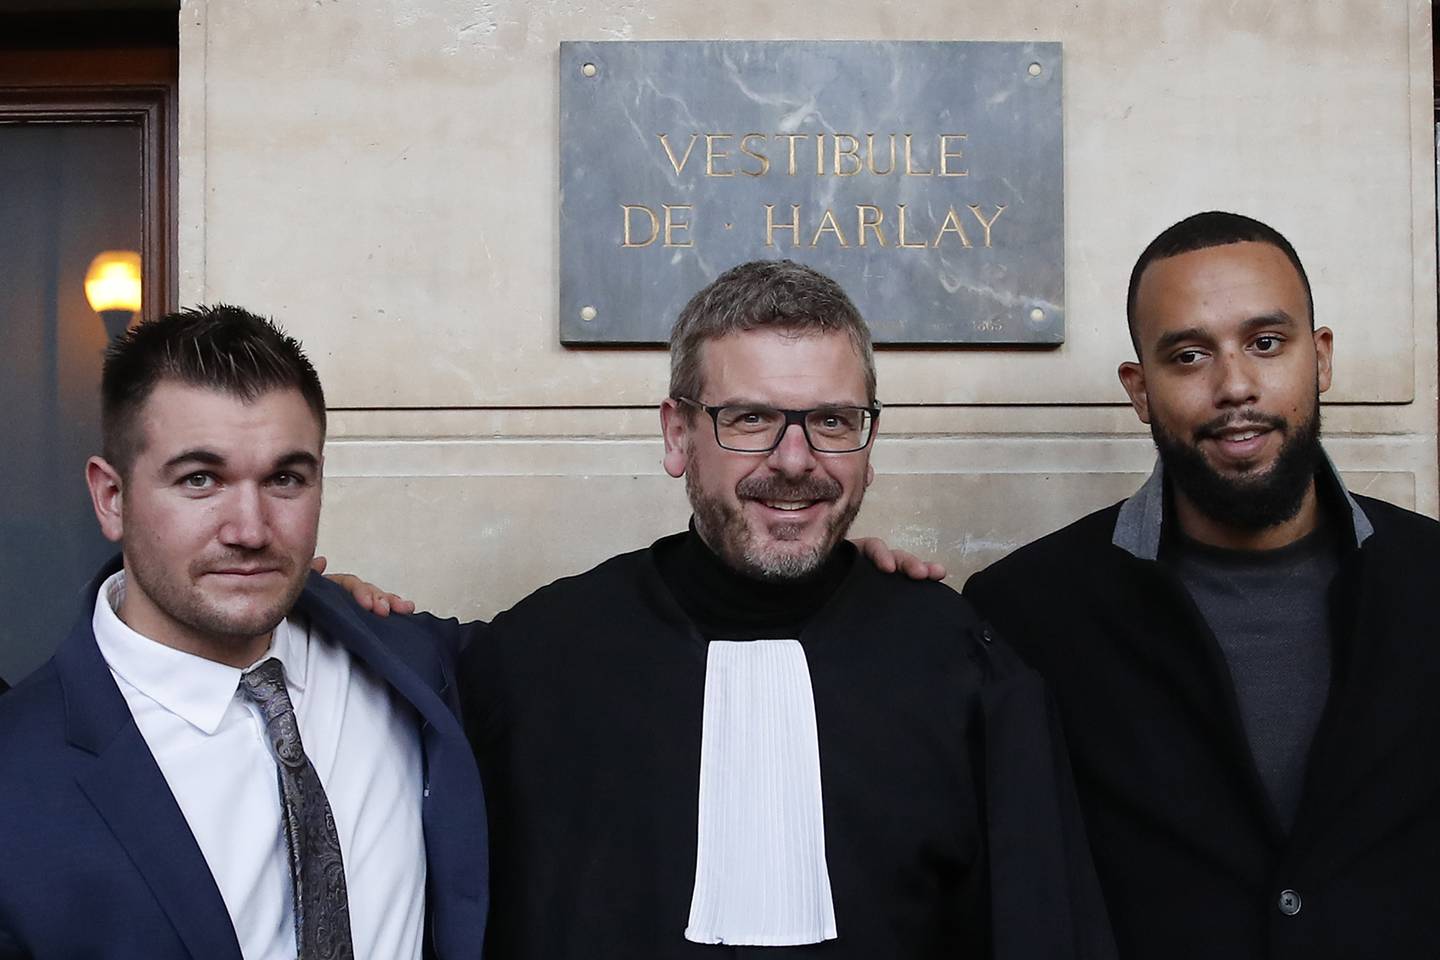 Alek Skarlatos, left, Anthony Sadler, right, and their lawyer Thibault de Montbrial, pose for photographers at the end of their hearing during the Thalys attack trial at the Paris courthouse, Friday, Nov. 20, 2020.